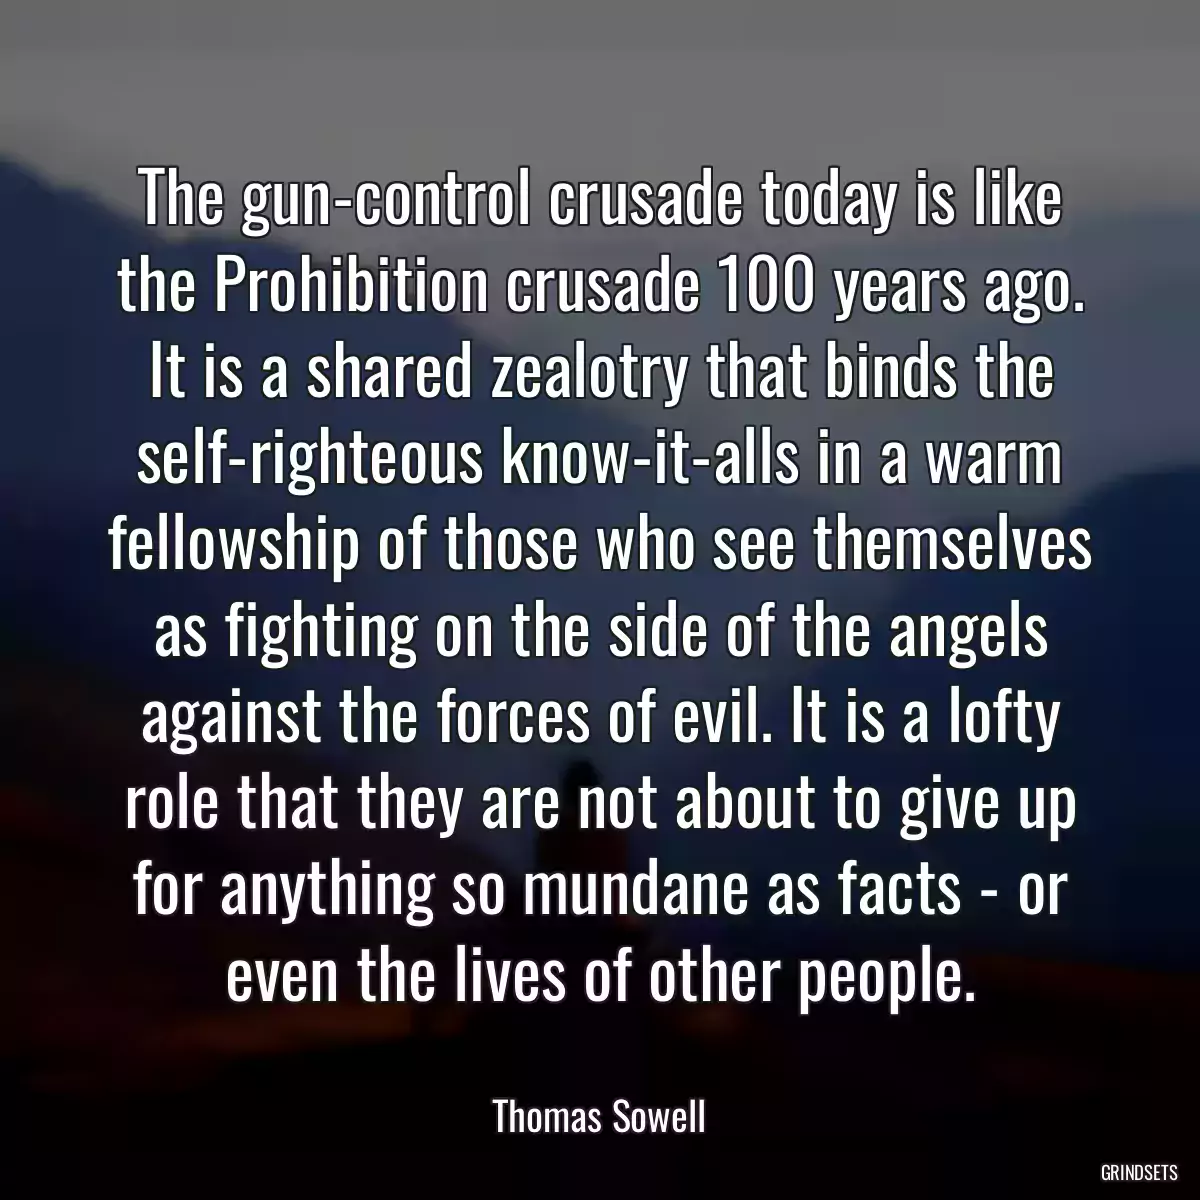 The gun-control crusade today is like the Prohibition crusade 100 years ago. It is a shared zealotry that binds the self-righteous know-it-alls in a warm fellowship of those who see themselves as fighting on the side of the angels against the forces of evil. It is a lofty role that they are not about to give up for anything so mundane as facts - or even the lives of other people.